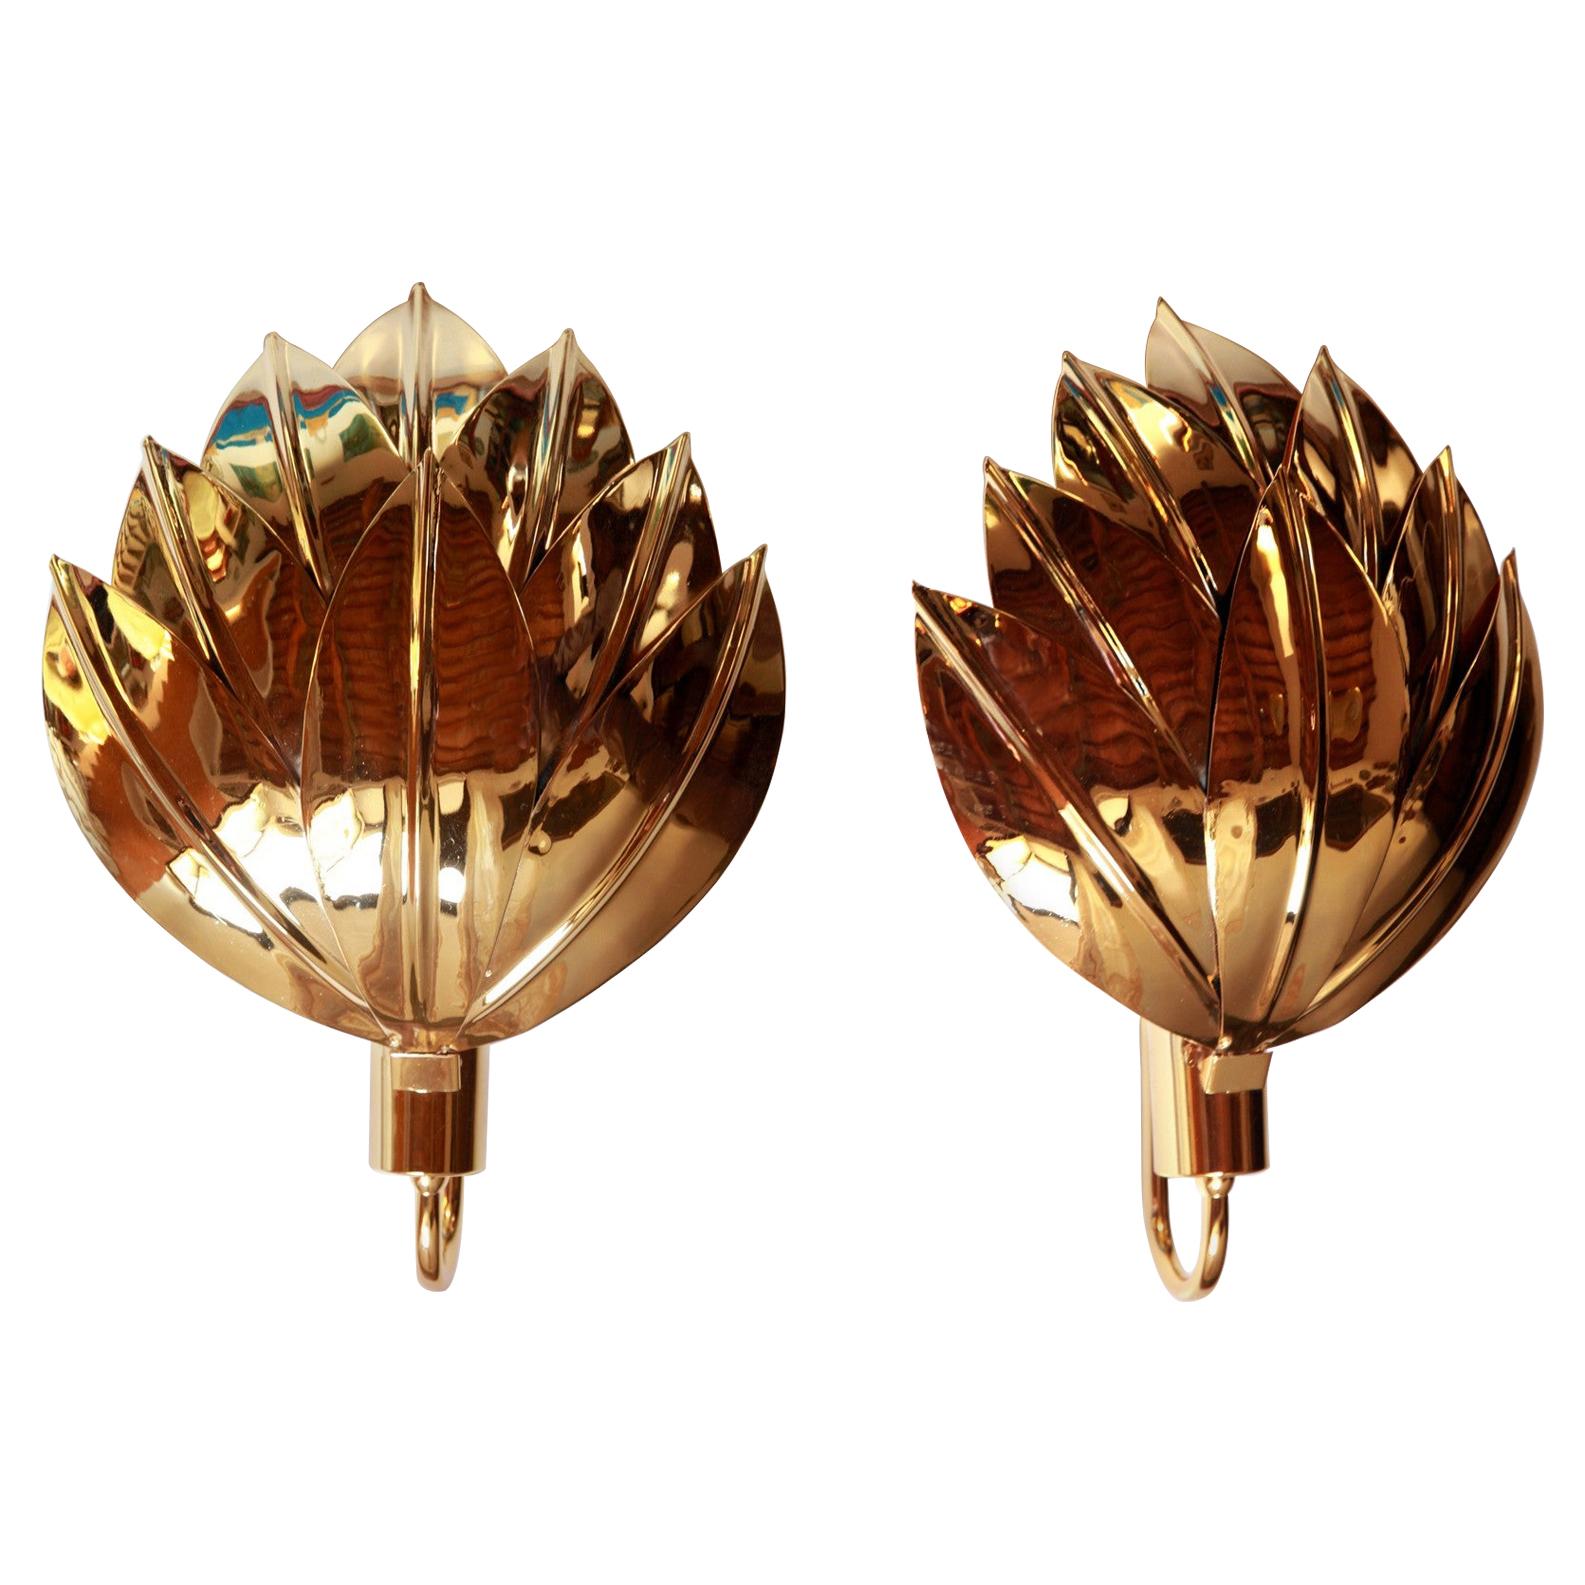 Two Pairs of Large Brass Gilded Palm Sconces, Maison Jansen Attribution